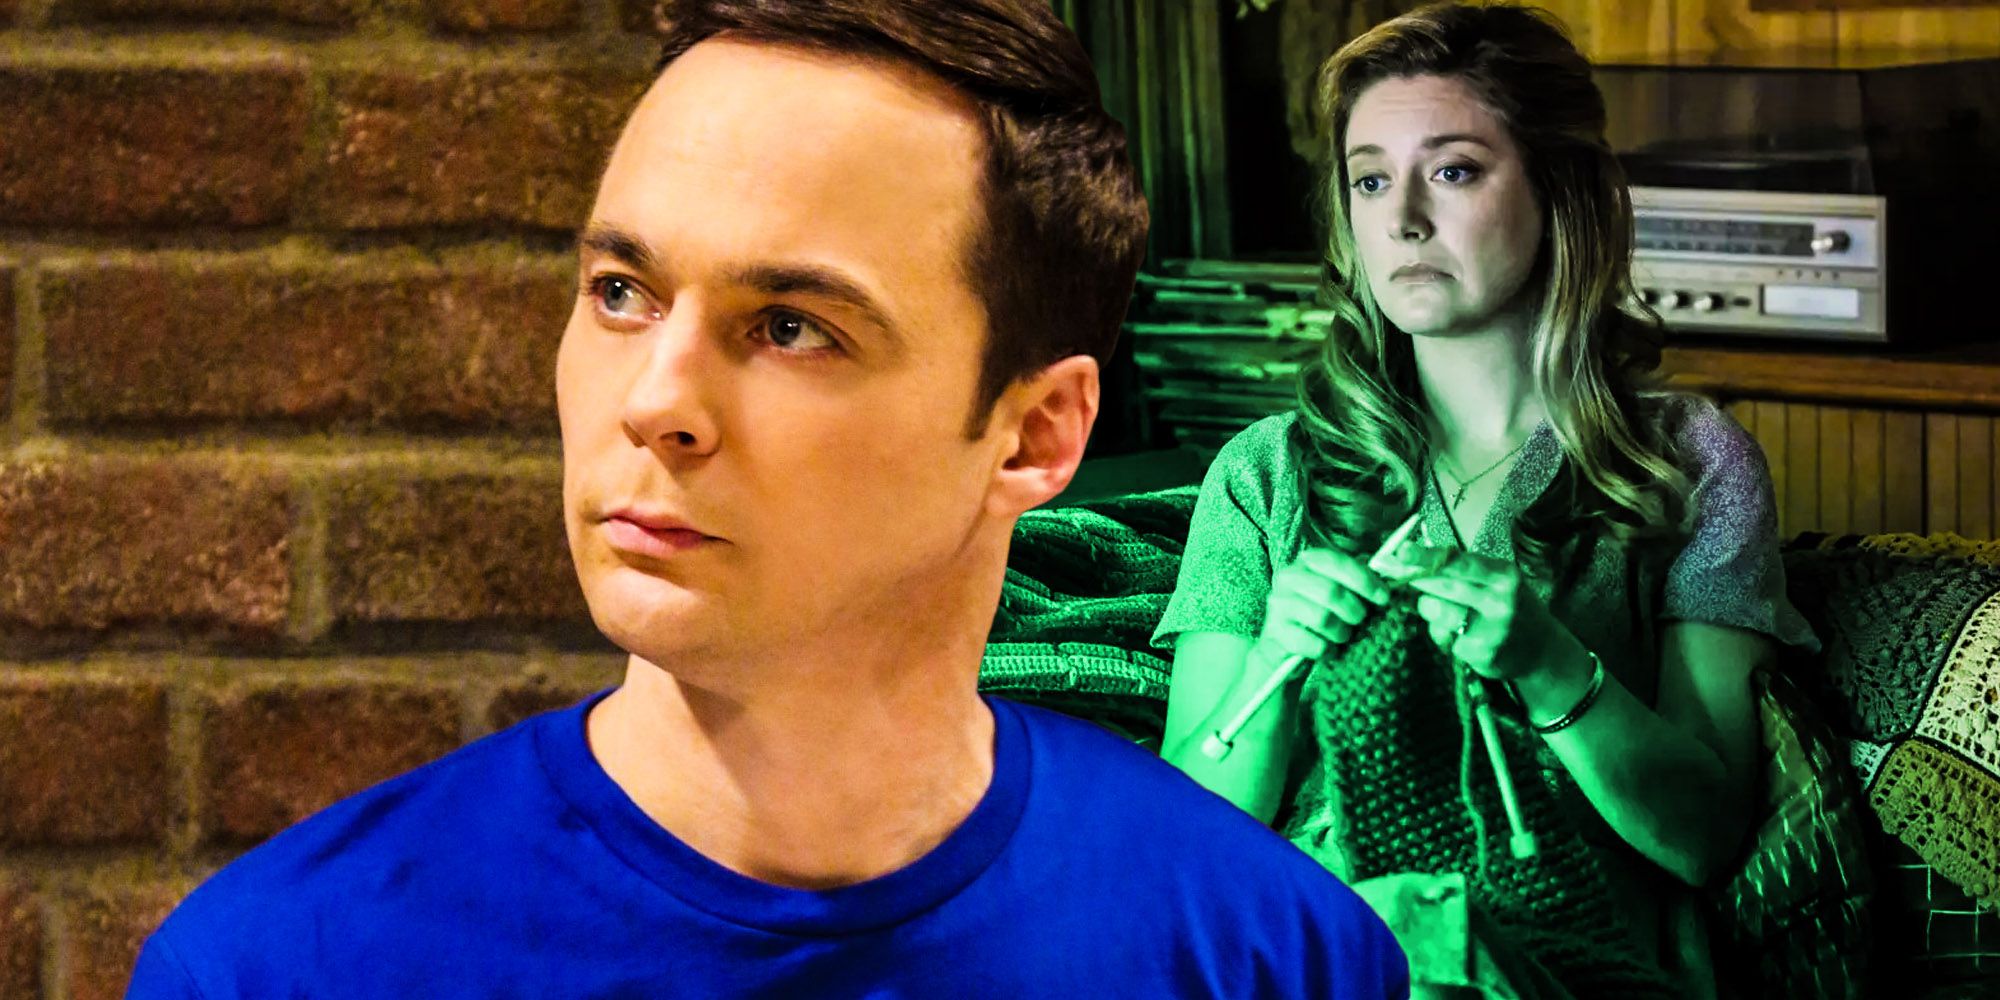 Sheldon’s Worst Trait in The Big Bang Theory Came From His Mother